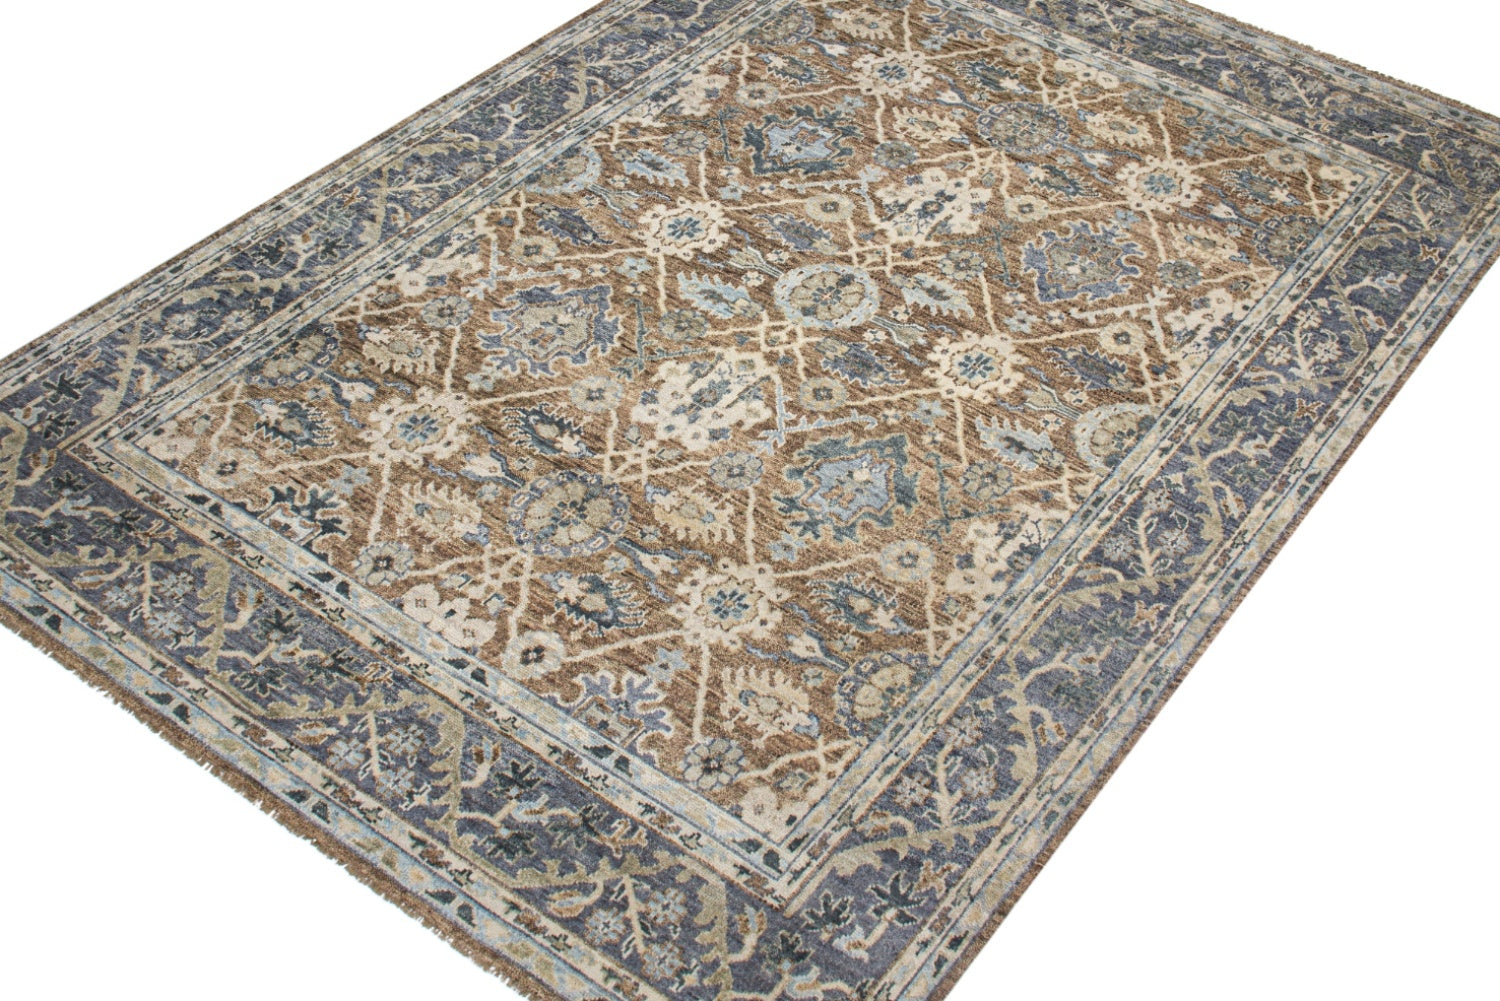 Sultanabad 2 Handwoven Traditional Rug, J72607